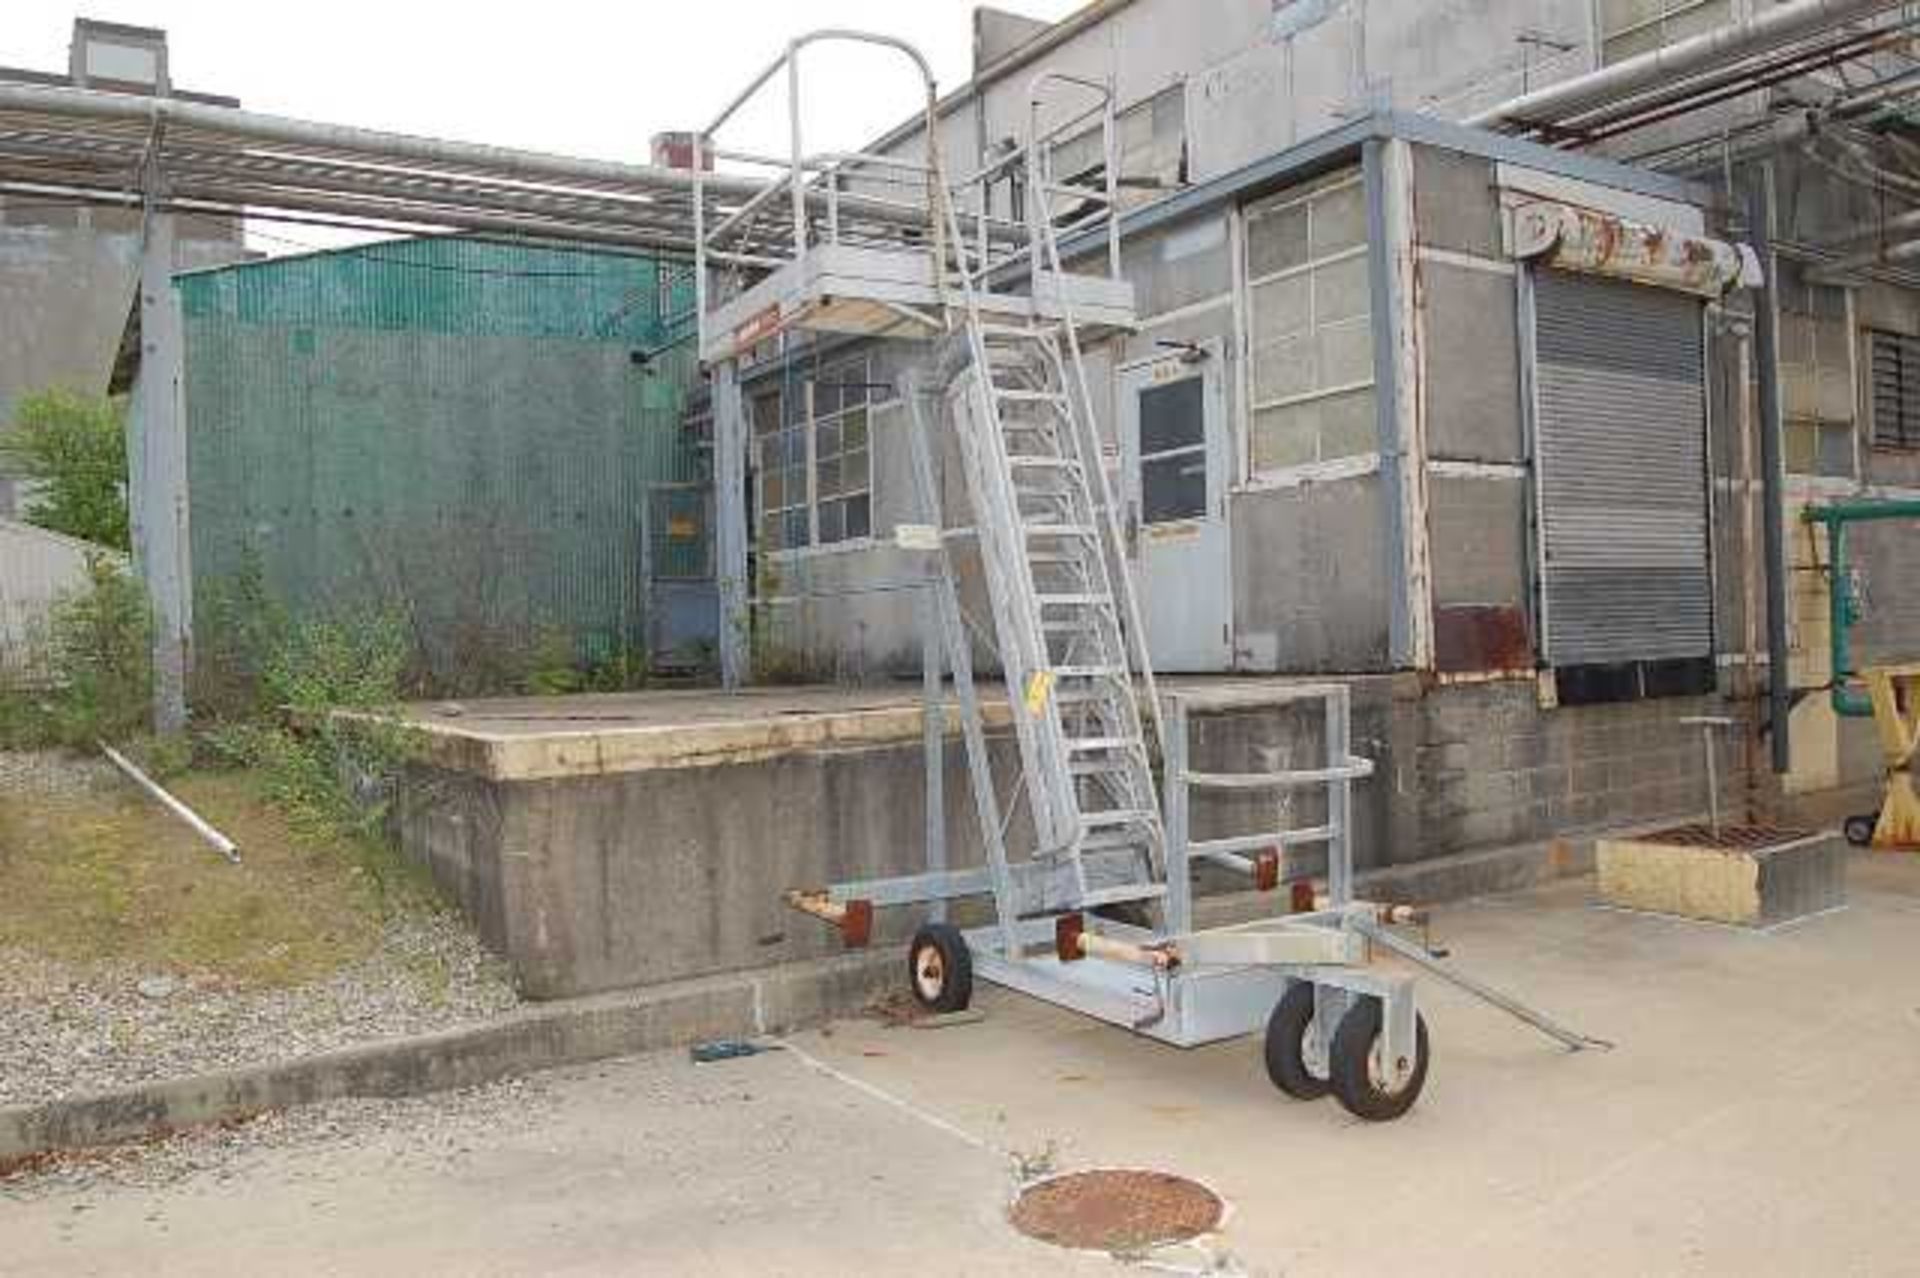 Carbis Manual Operated Manlift, Air Tires, Ladder Extension - Image 2 of 2